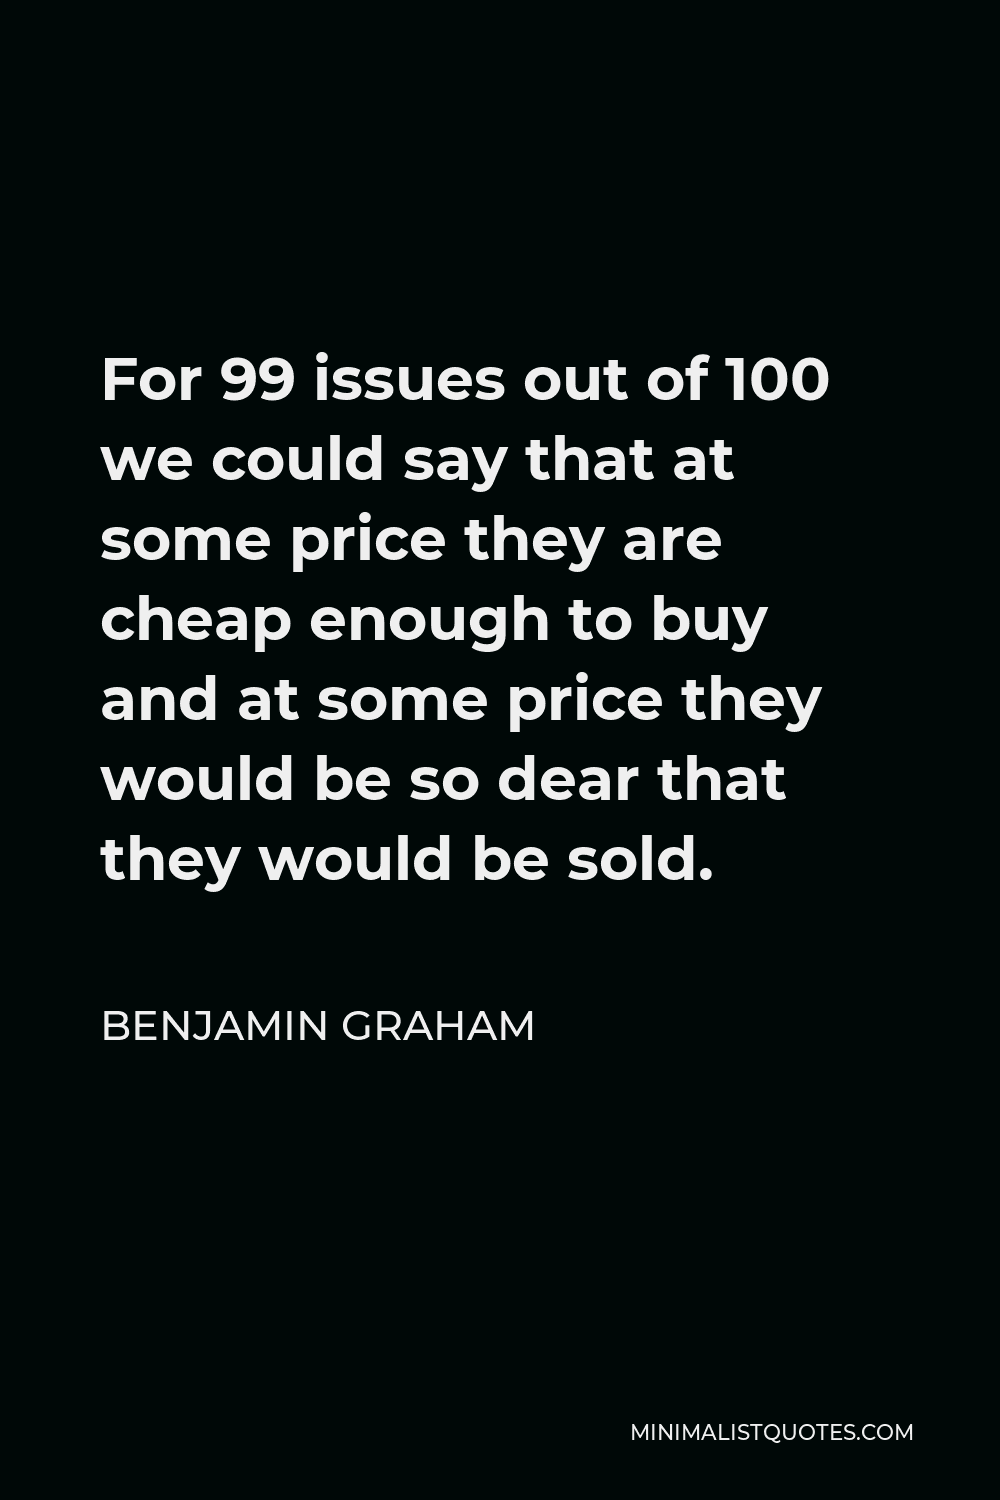 Benjamin Graham Quote - For 99 issues out of 100 we could say that at some price they are cheap enough to buy and at some price they would be so dear that they would be sold.